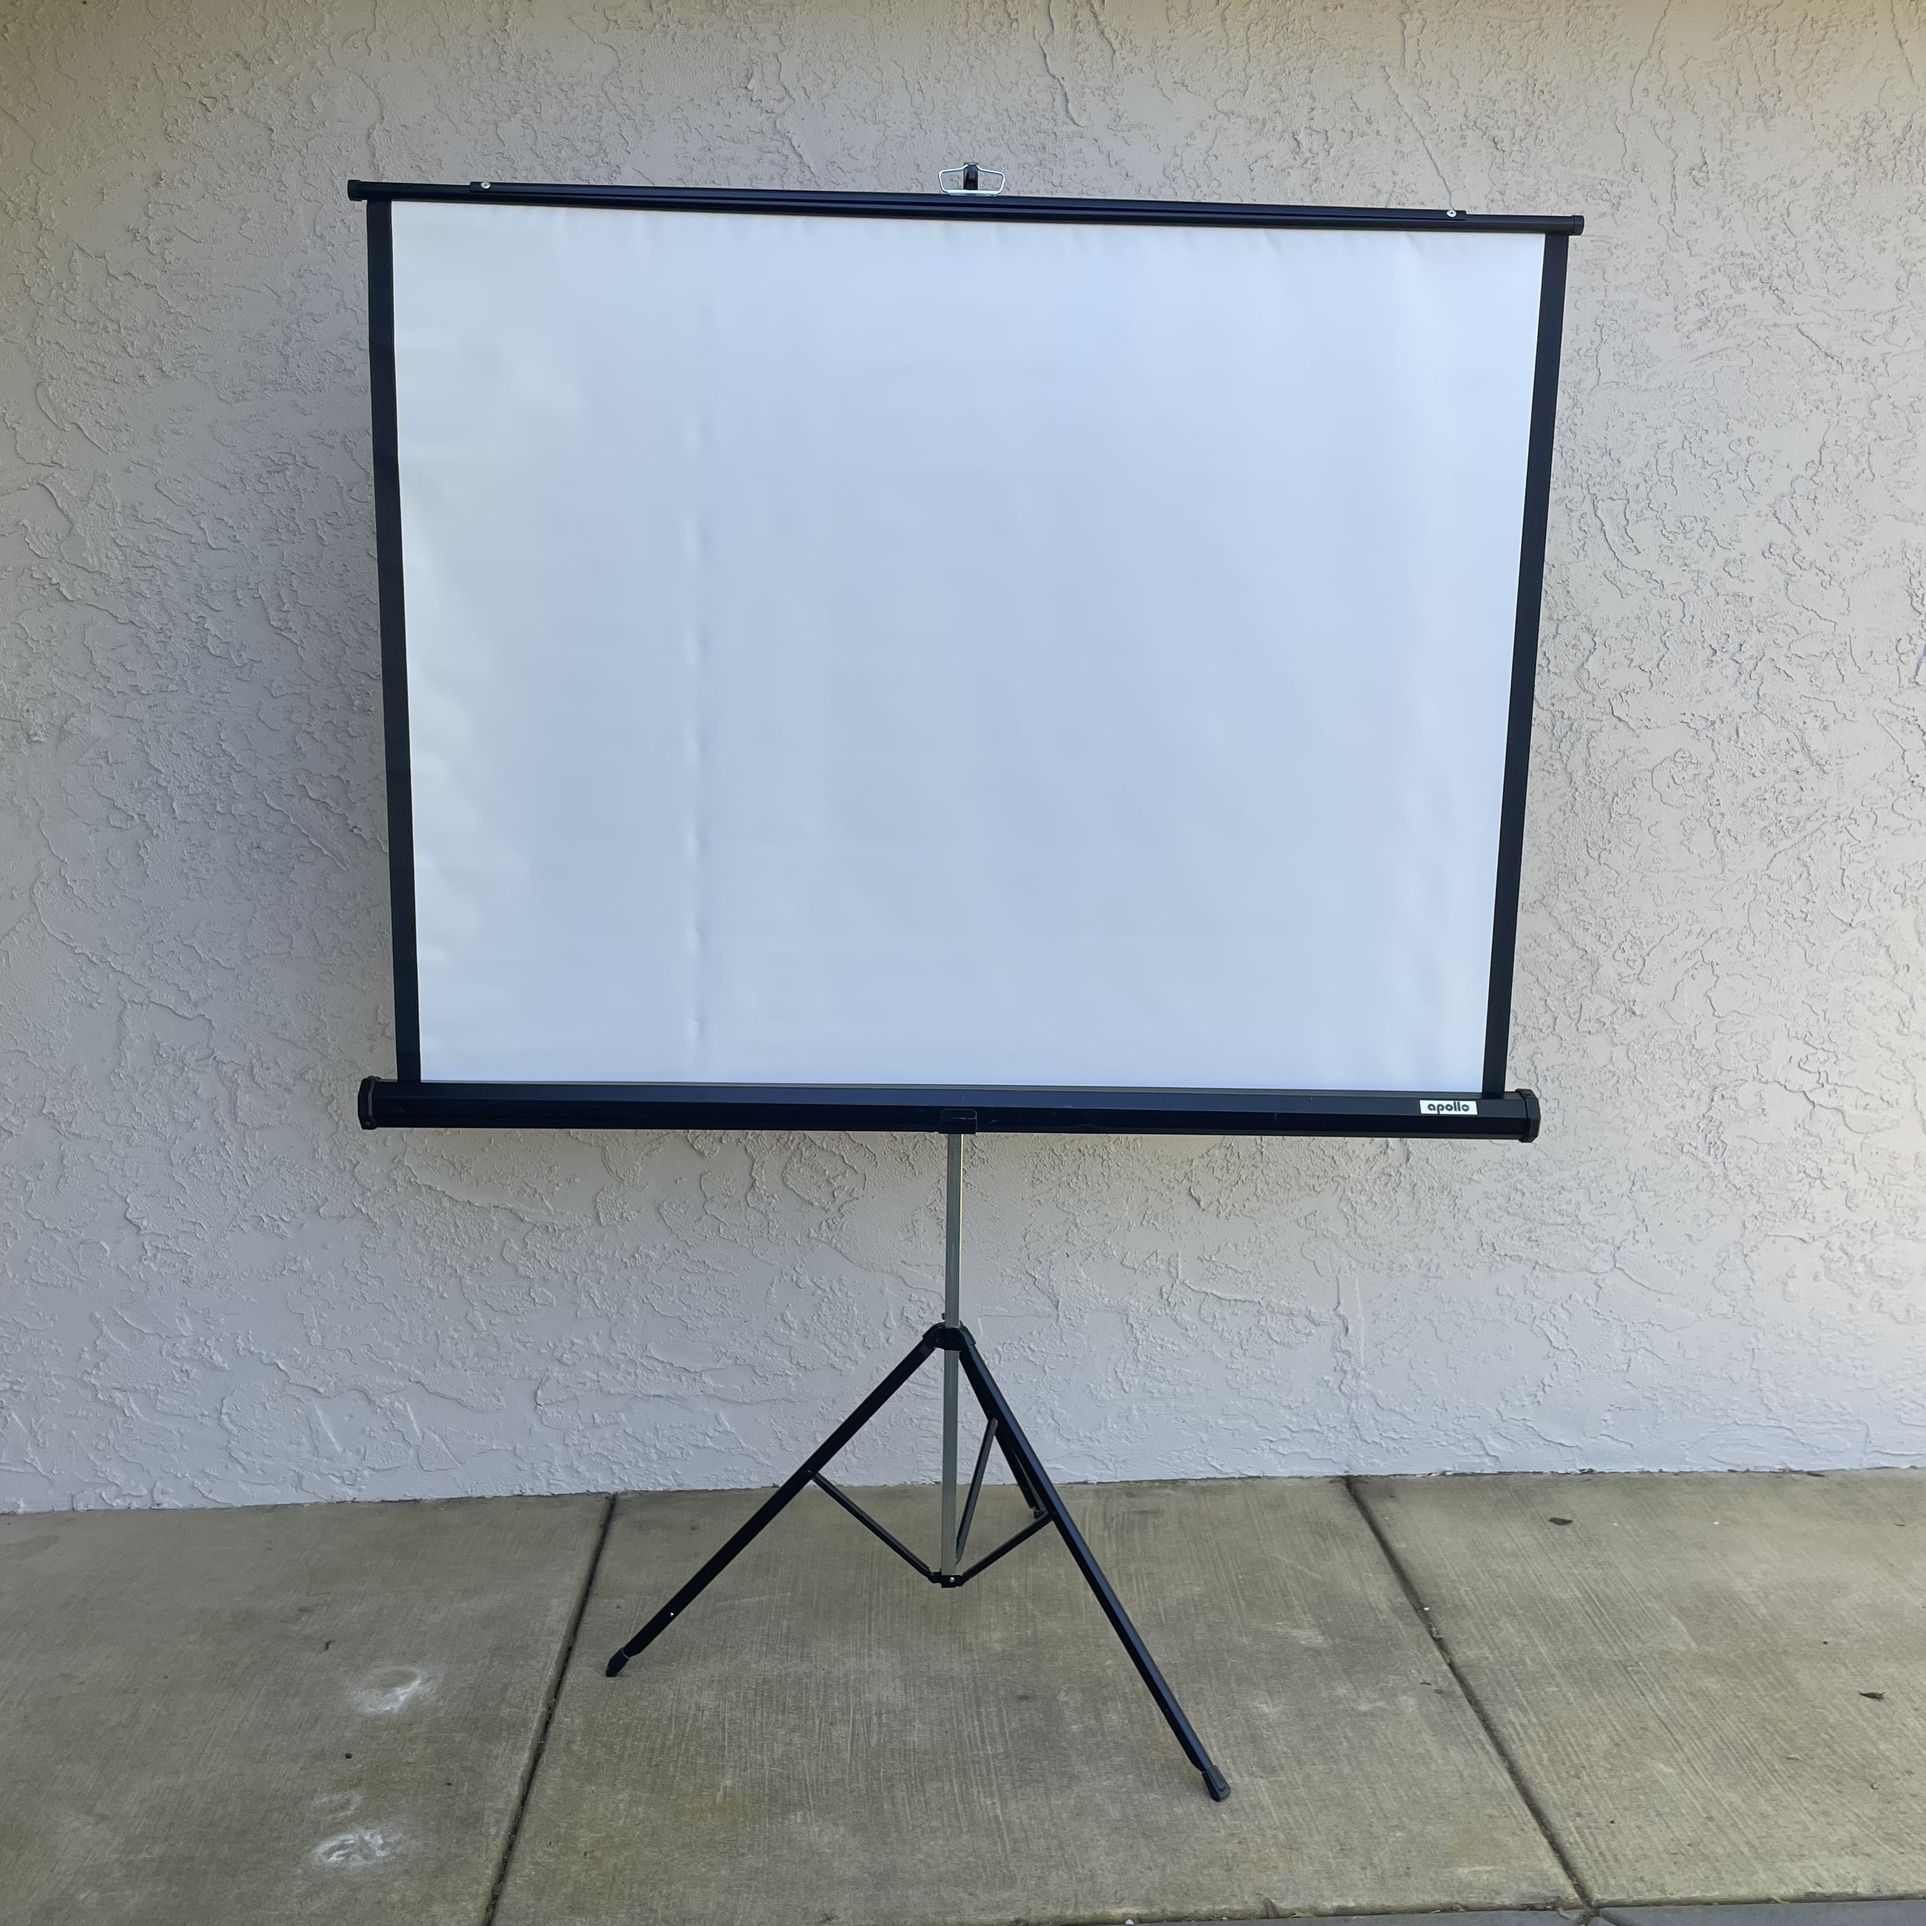 Projector Screen Portable Fold Up Tripod Stand 65” Size